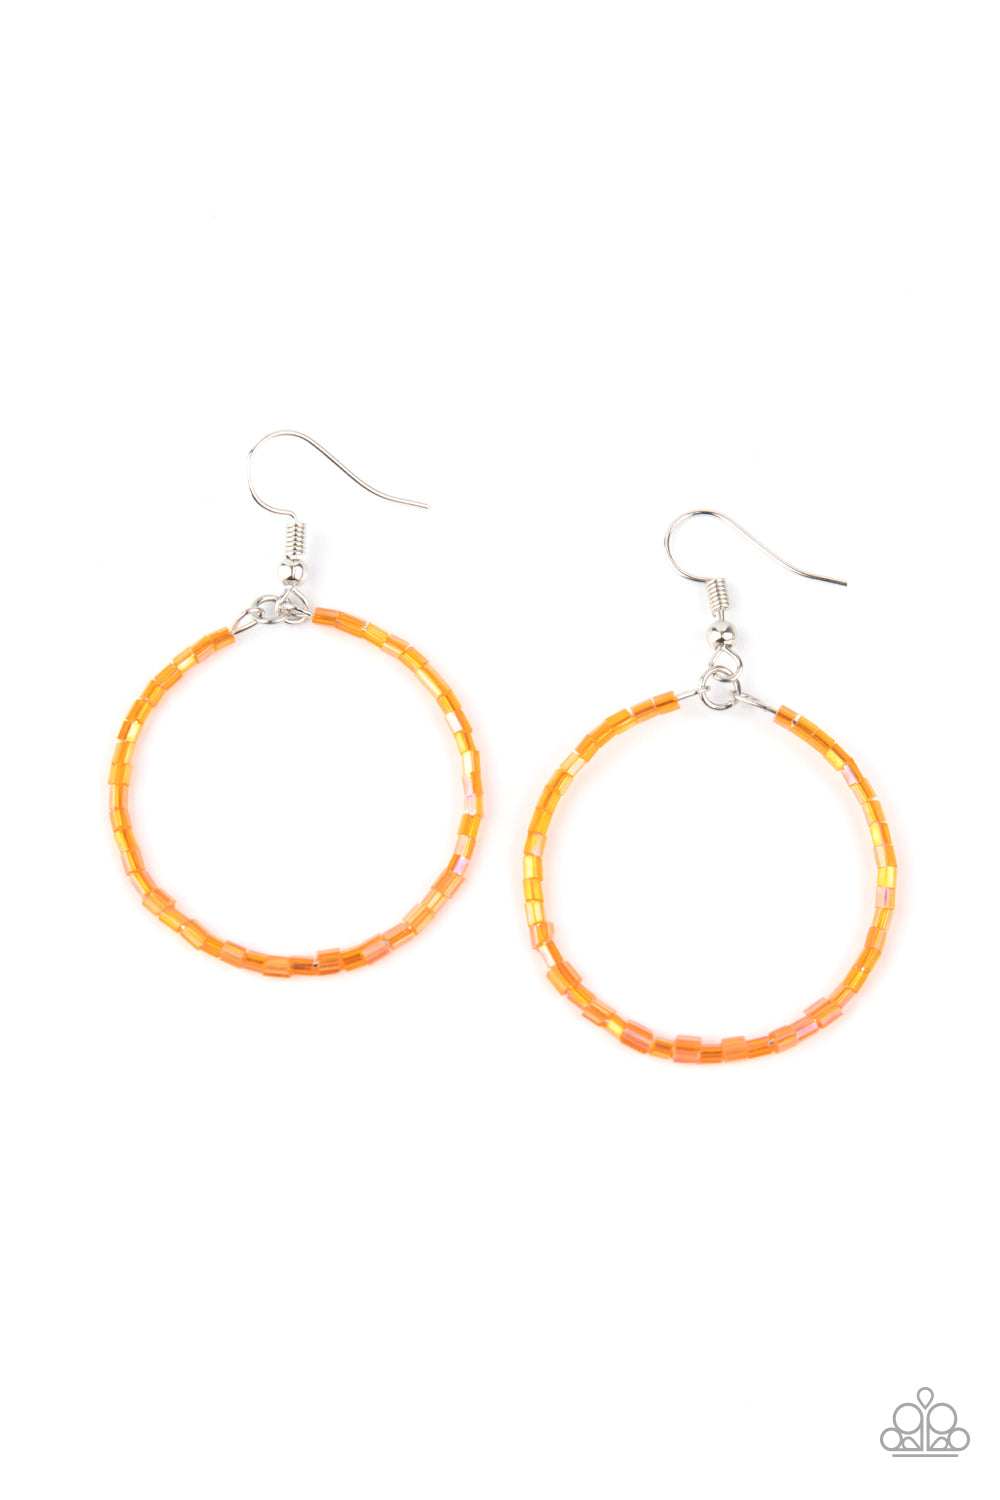 Paparazzi Accessories Colorfully Curvy - Orange Earrings - Lady T Accessories